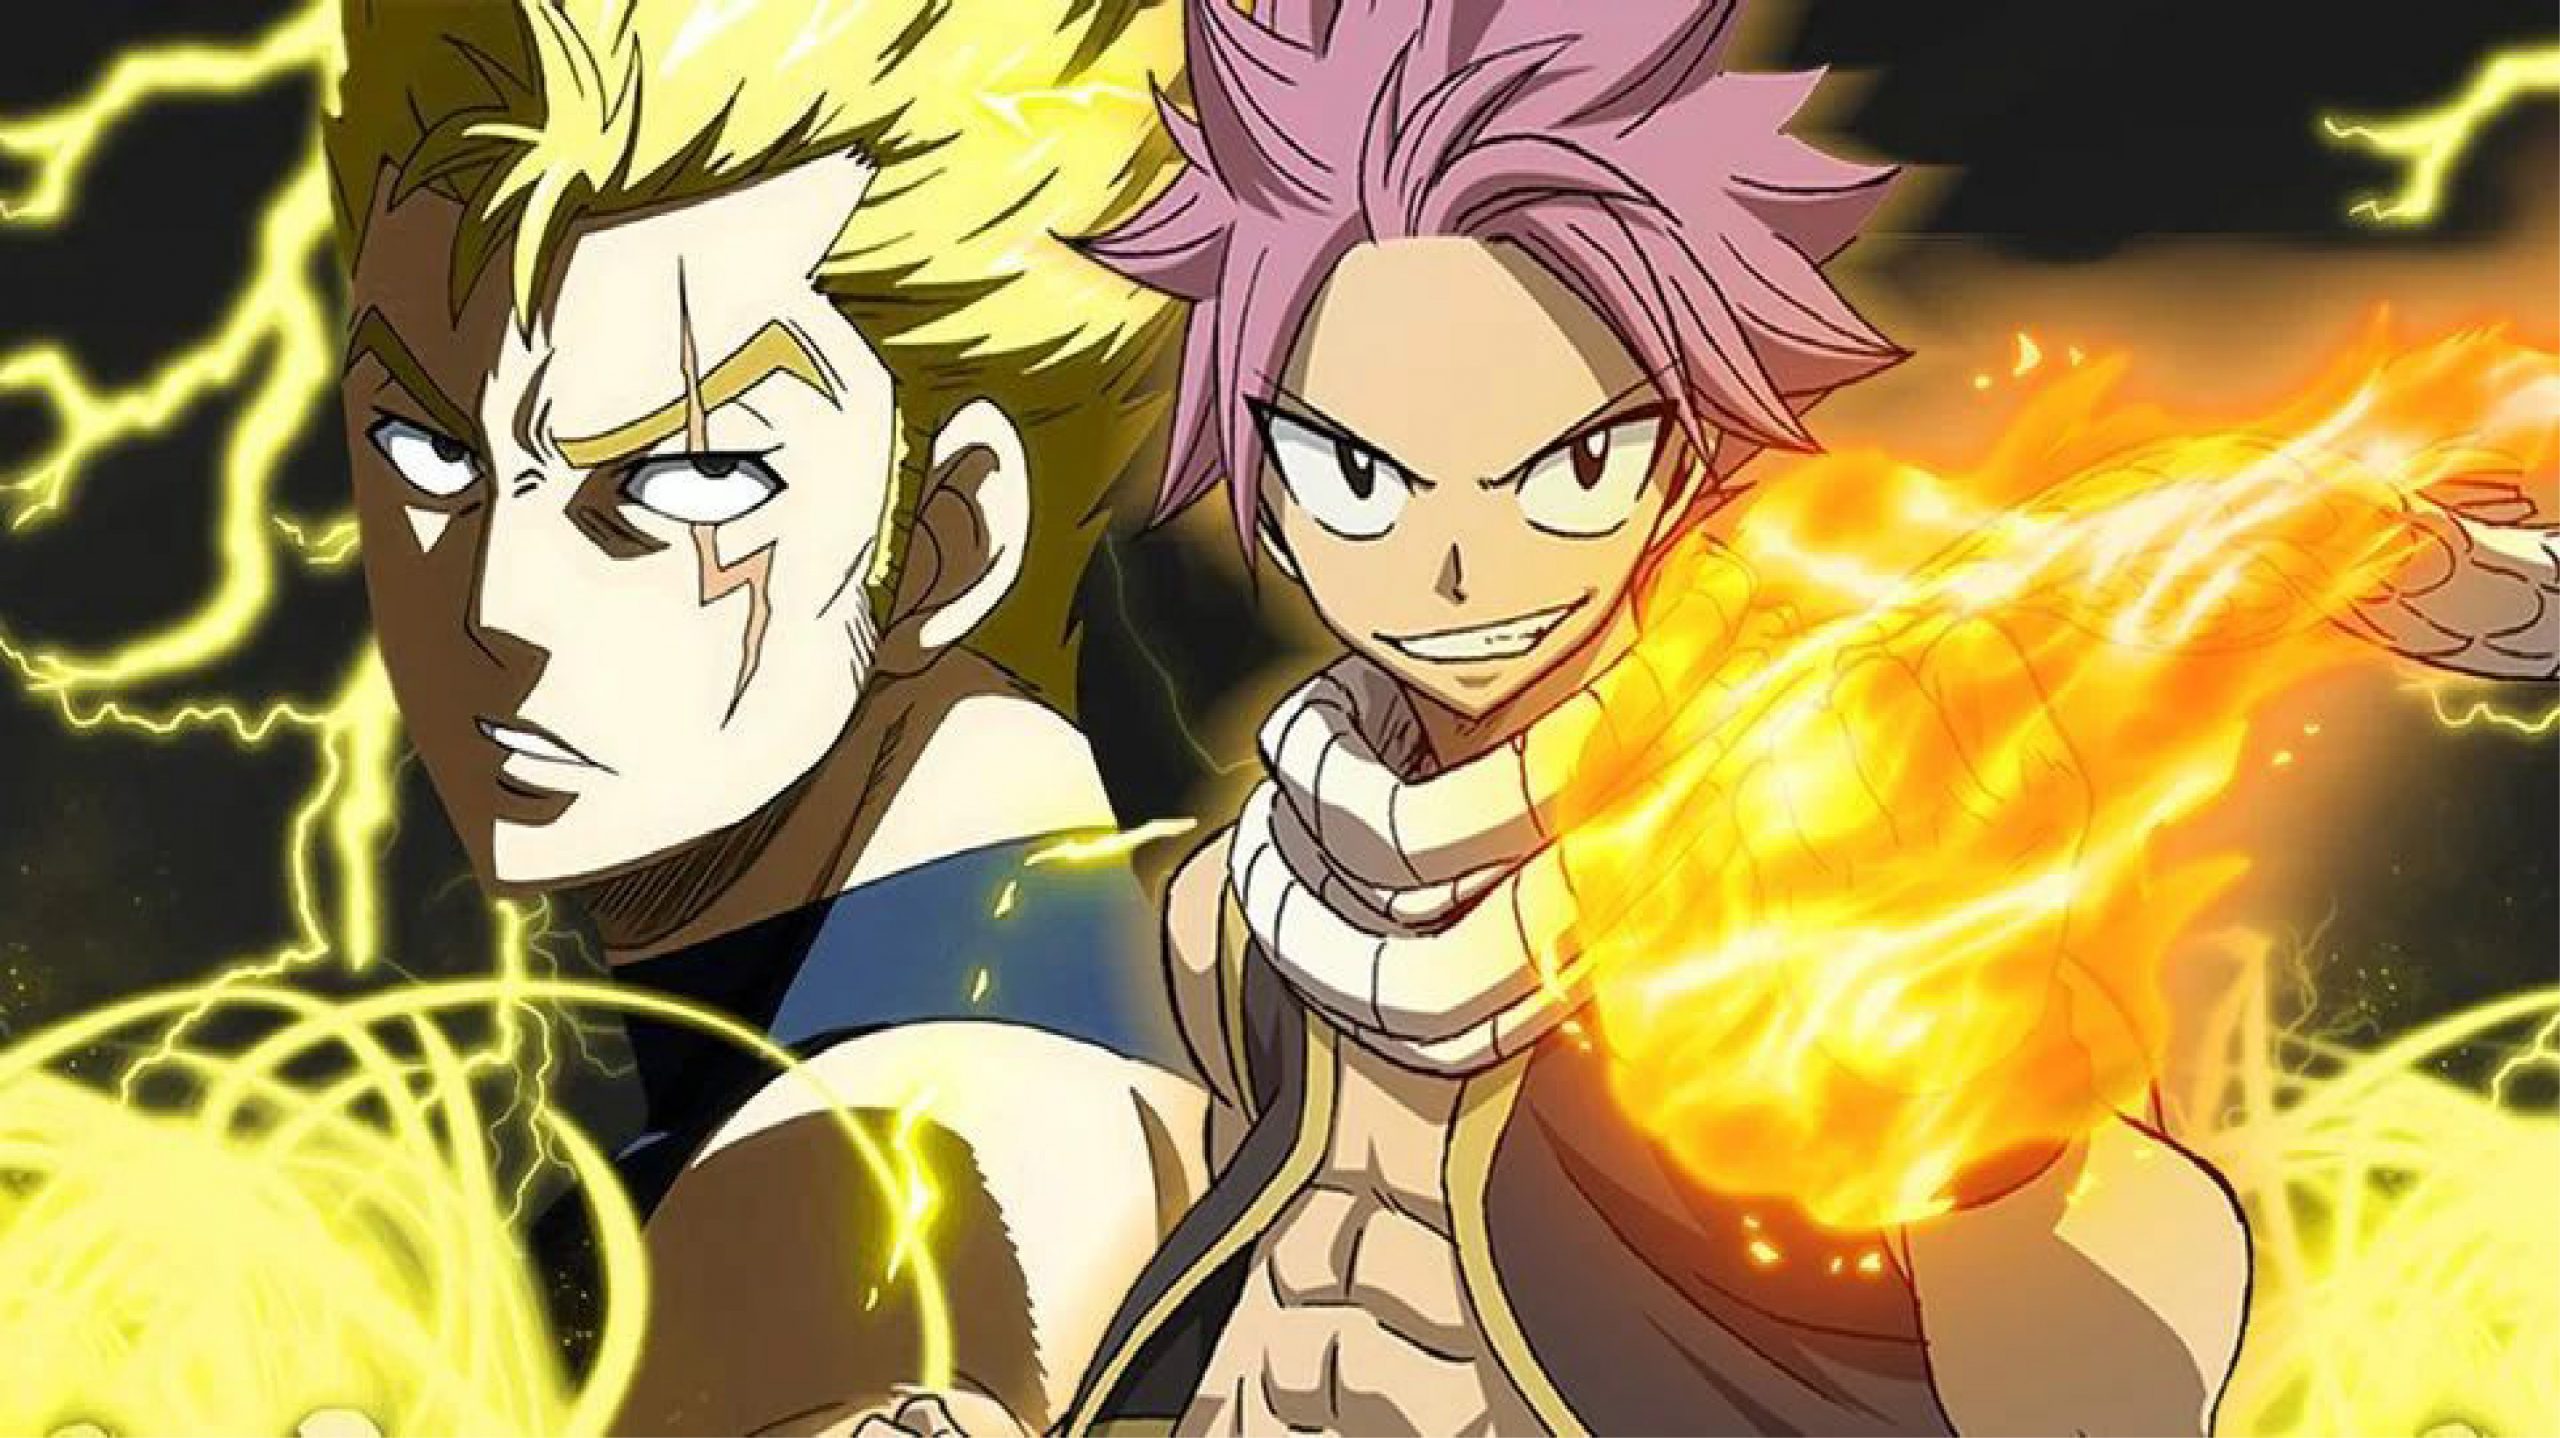 10 Facts about Natsu Dragneel, the Dragon Slayer with Fire Magic